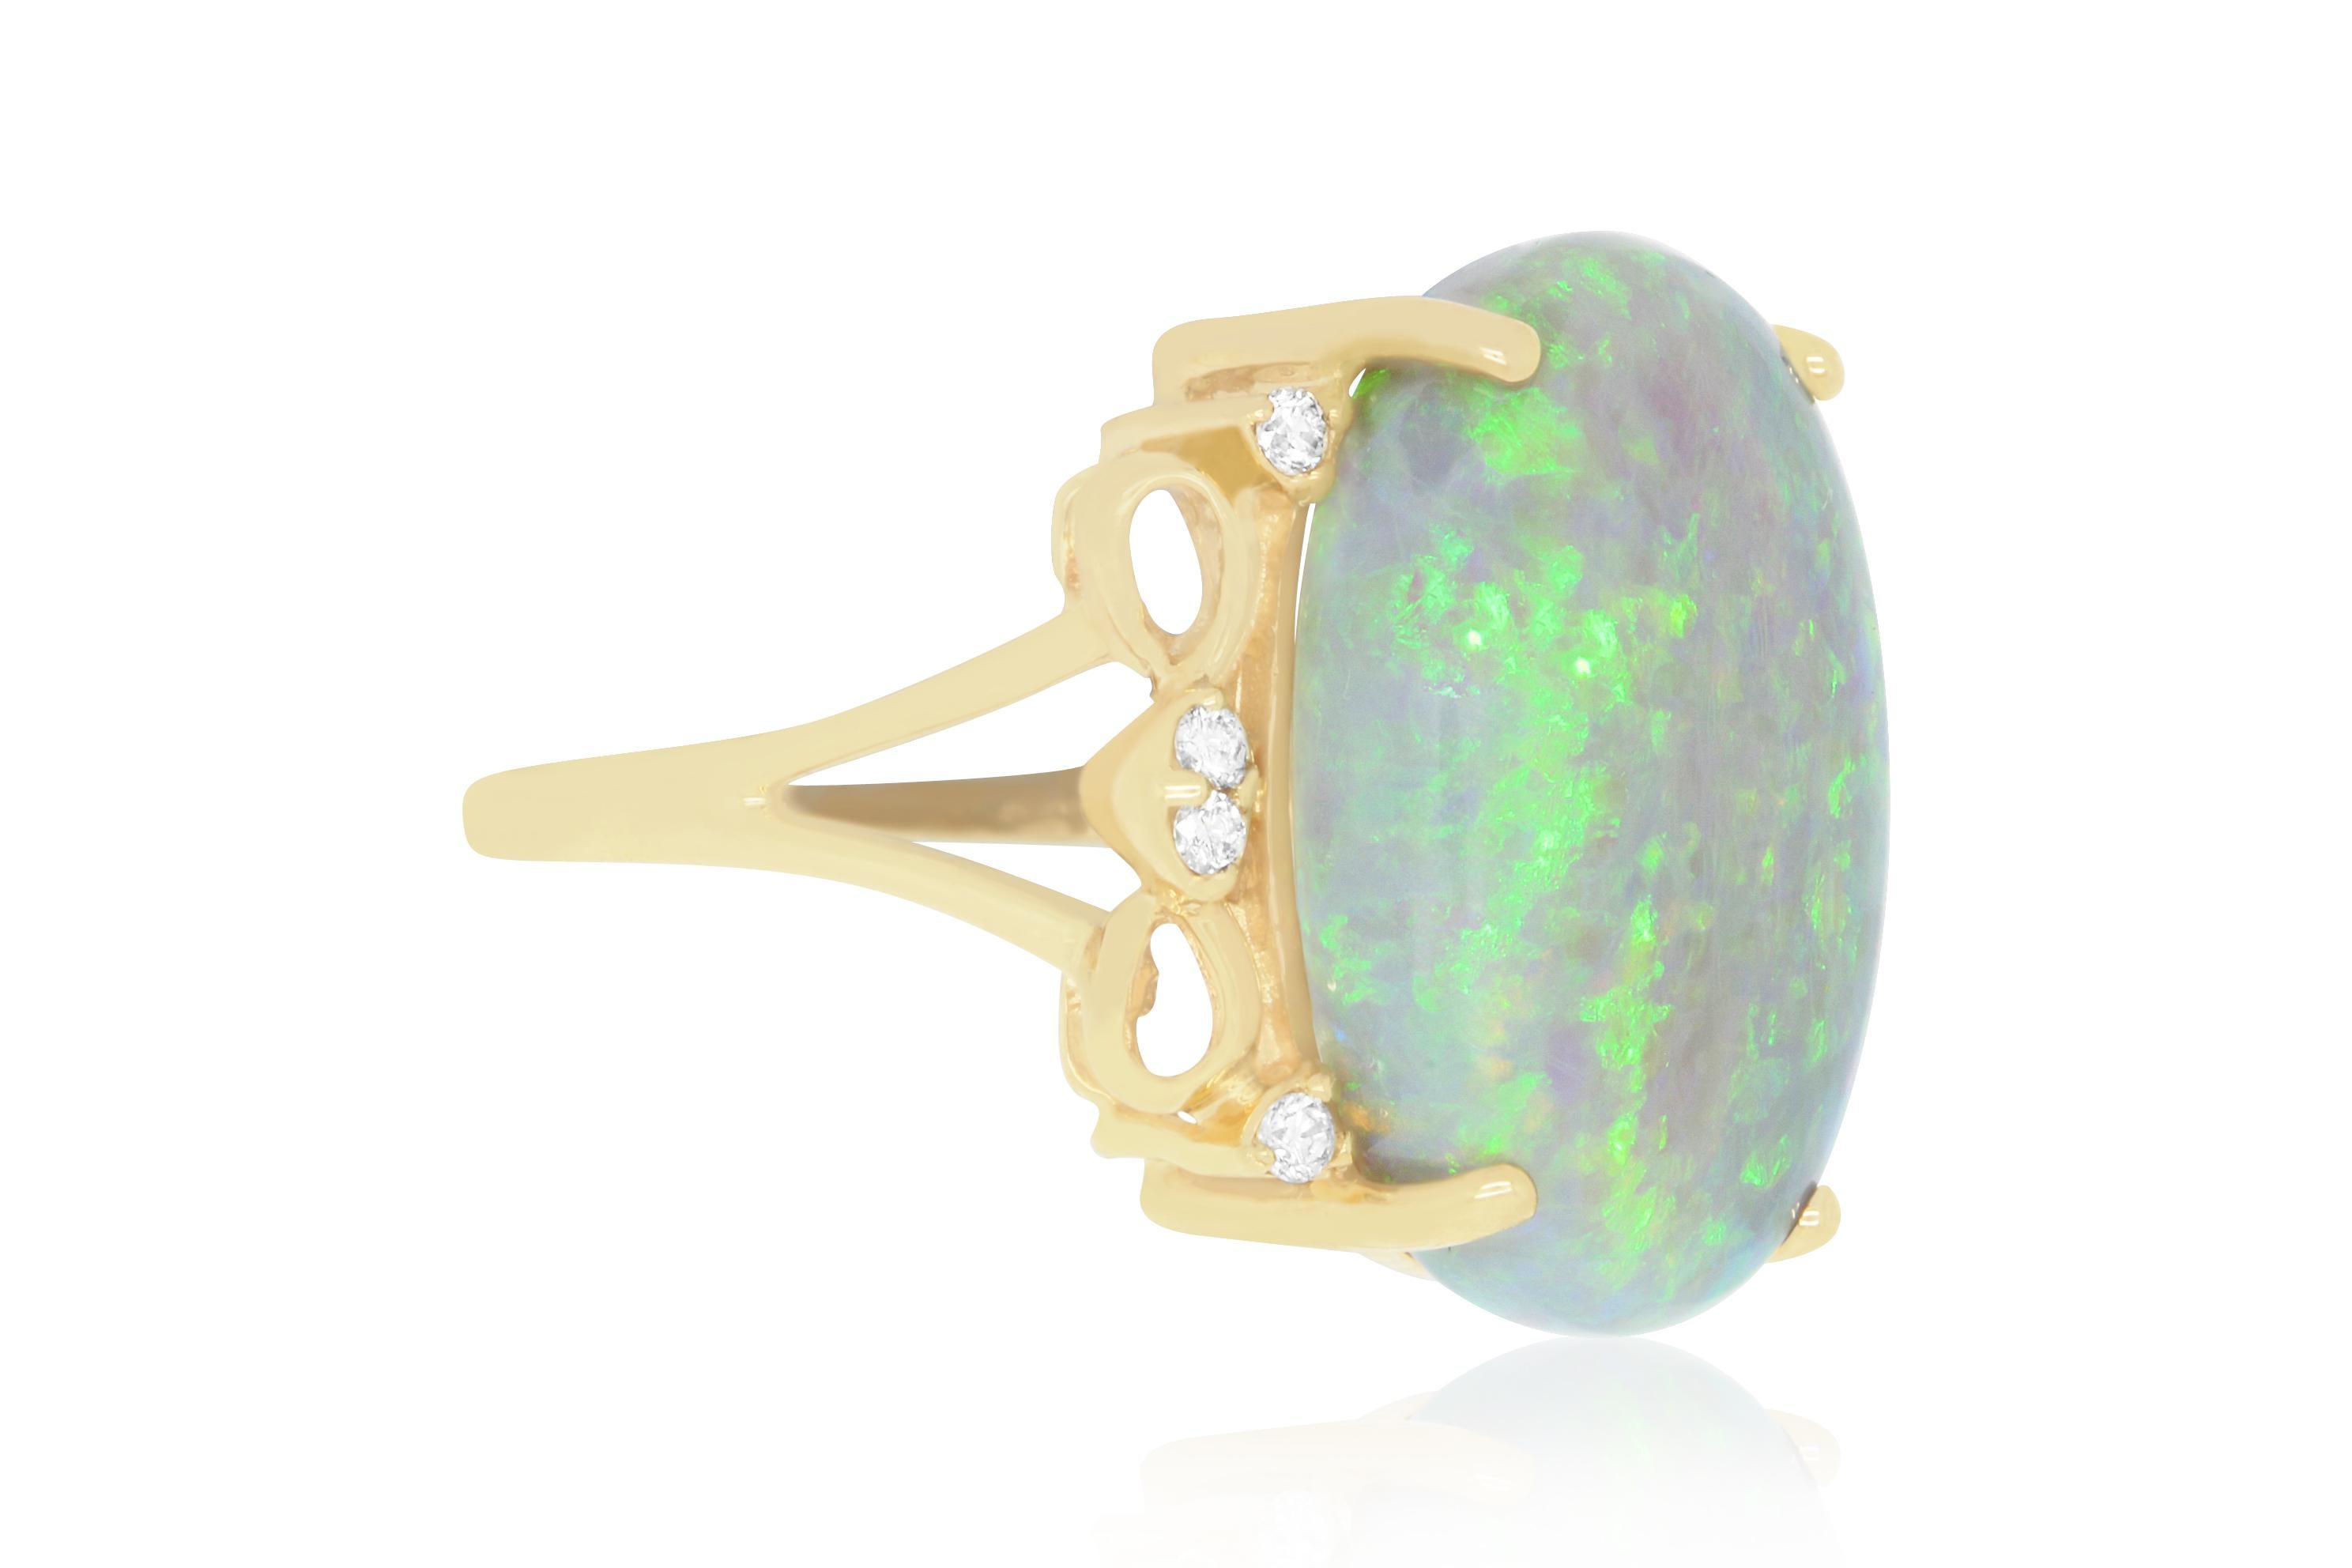 This beautiful 9.94 Carat Oval shaped Opal is complemented with swirls of 14K Yellow Gold and adorned with a Brilliant Round White Diamonds totaling 0.09 Carat for a clean and classy look.

Material: 14k Yellow Gold
Gemstone: 1 Oval Opal at 9.94